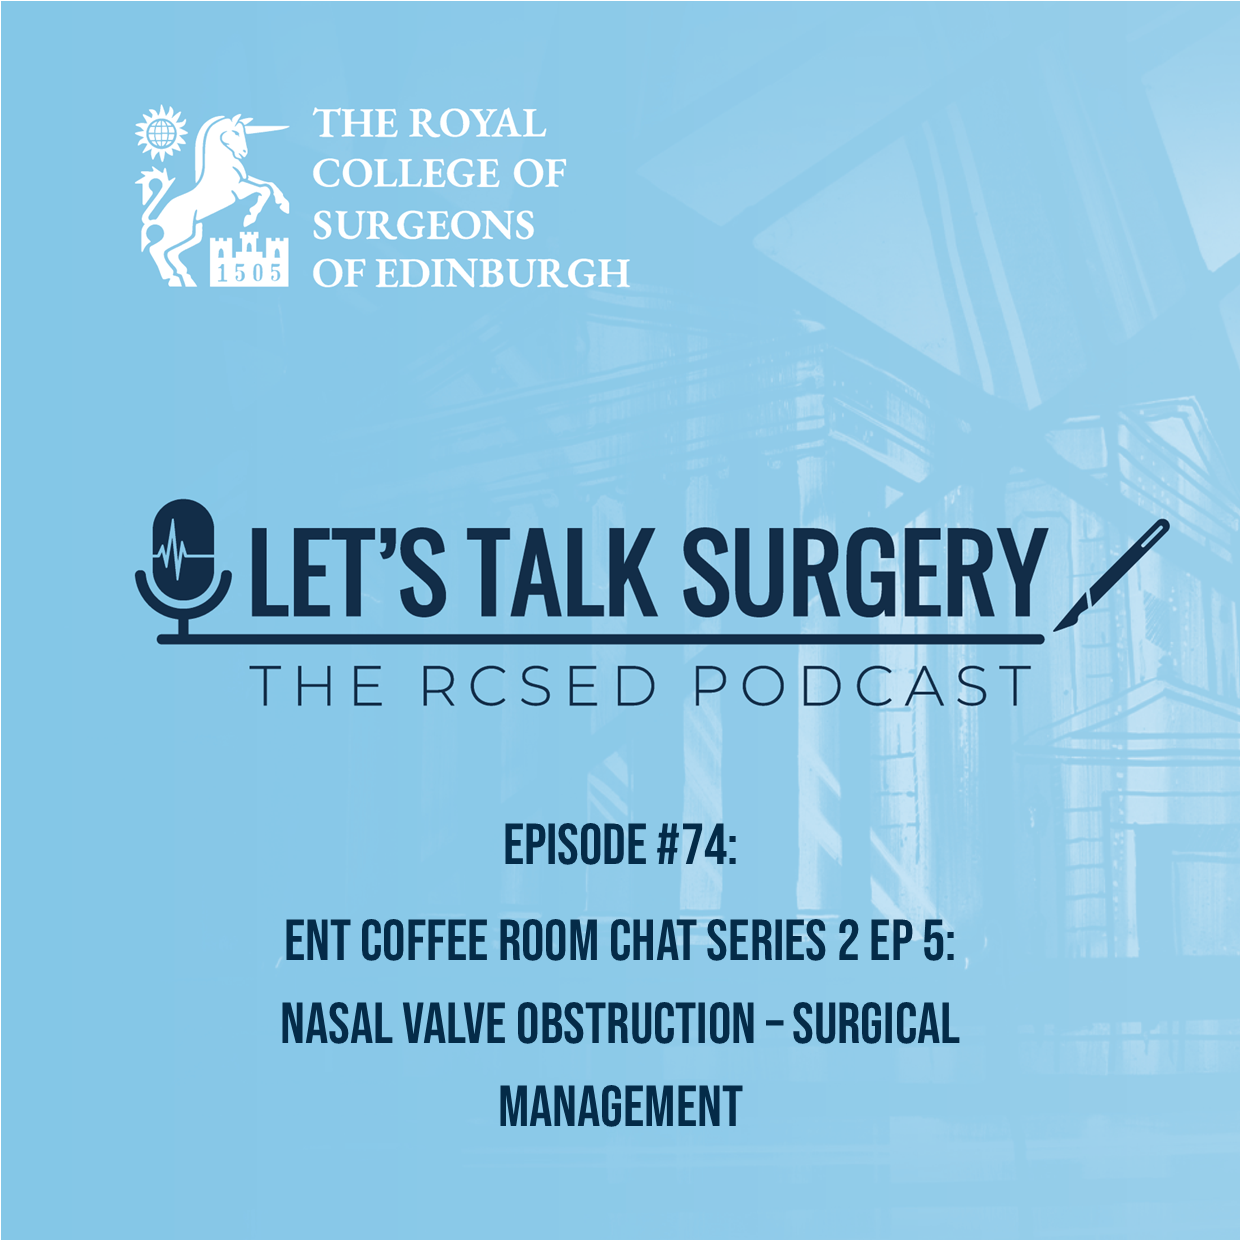 ENT Coffee Room Chat Series 2: Ep 5 - Nasal Valve Obstruction – Surgical Management